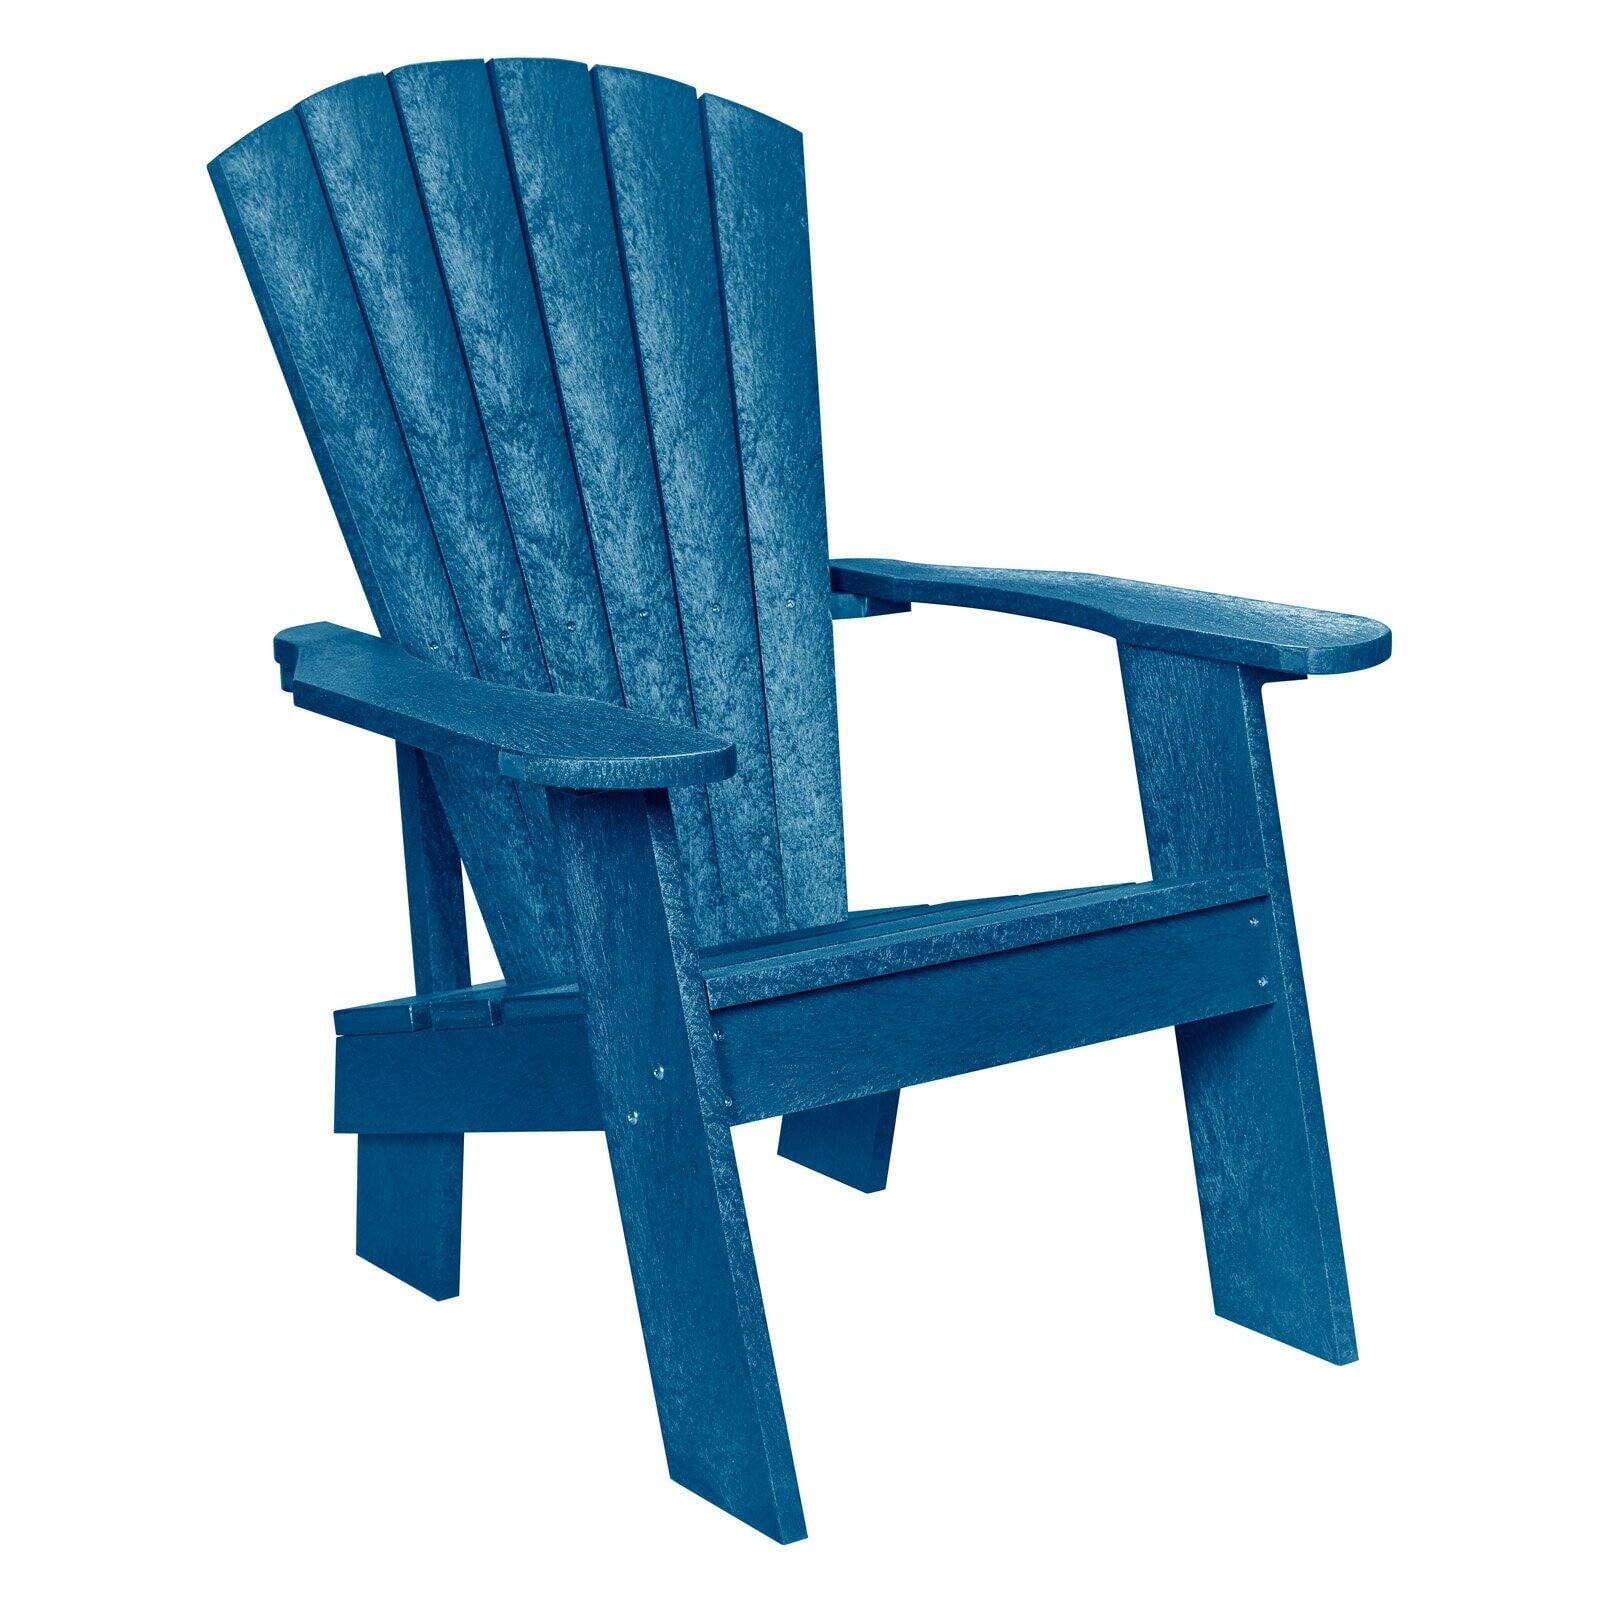 Capterra Casual Recycled Plastic Adirondack Chair, Pacific